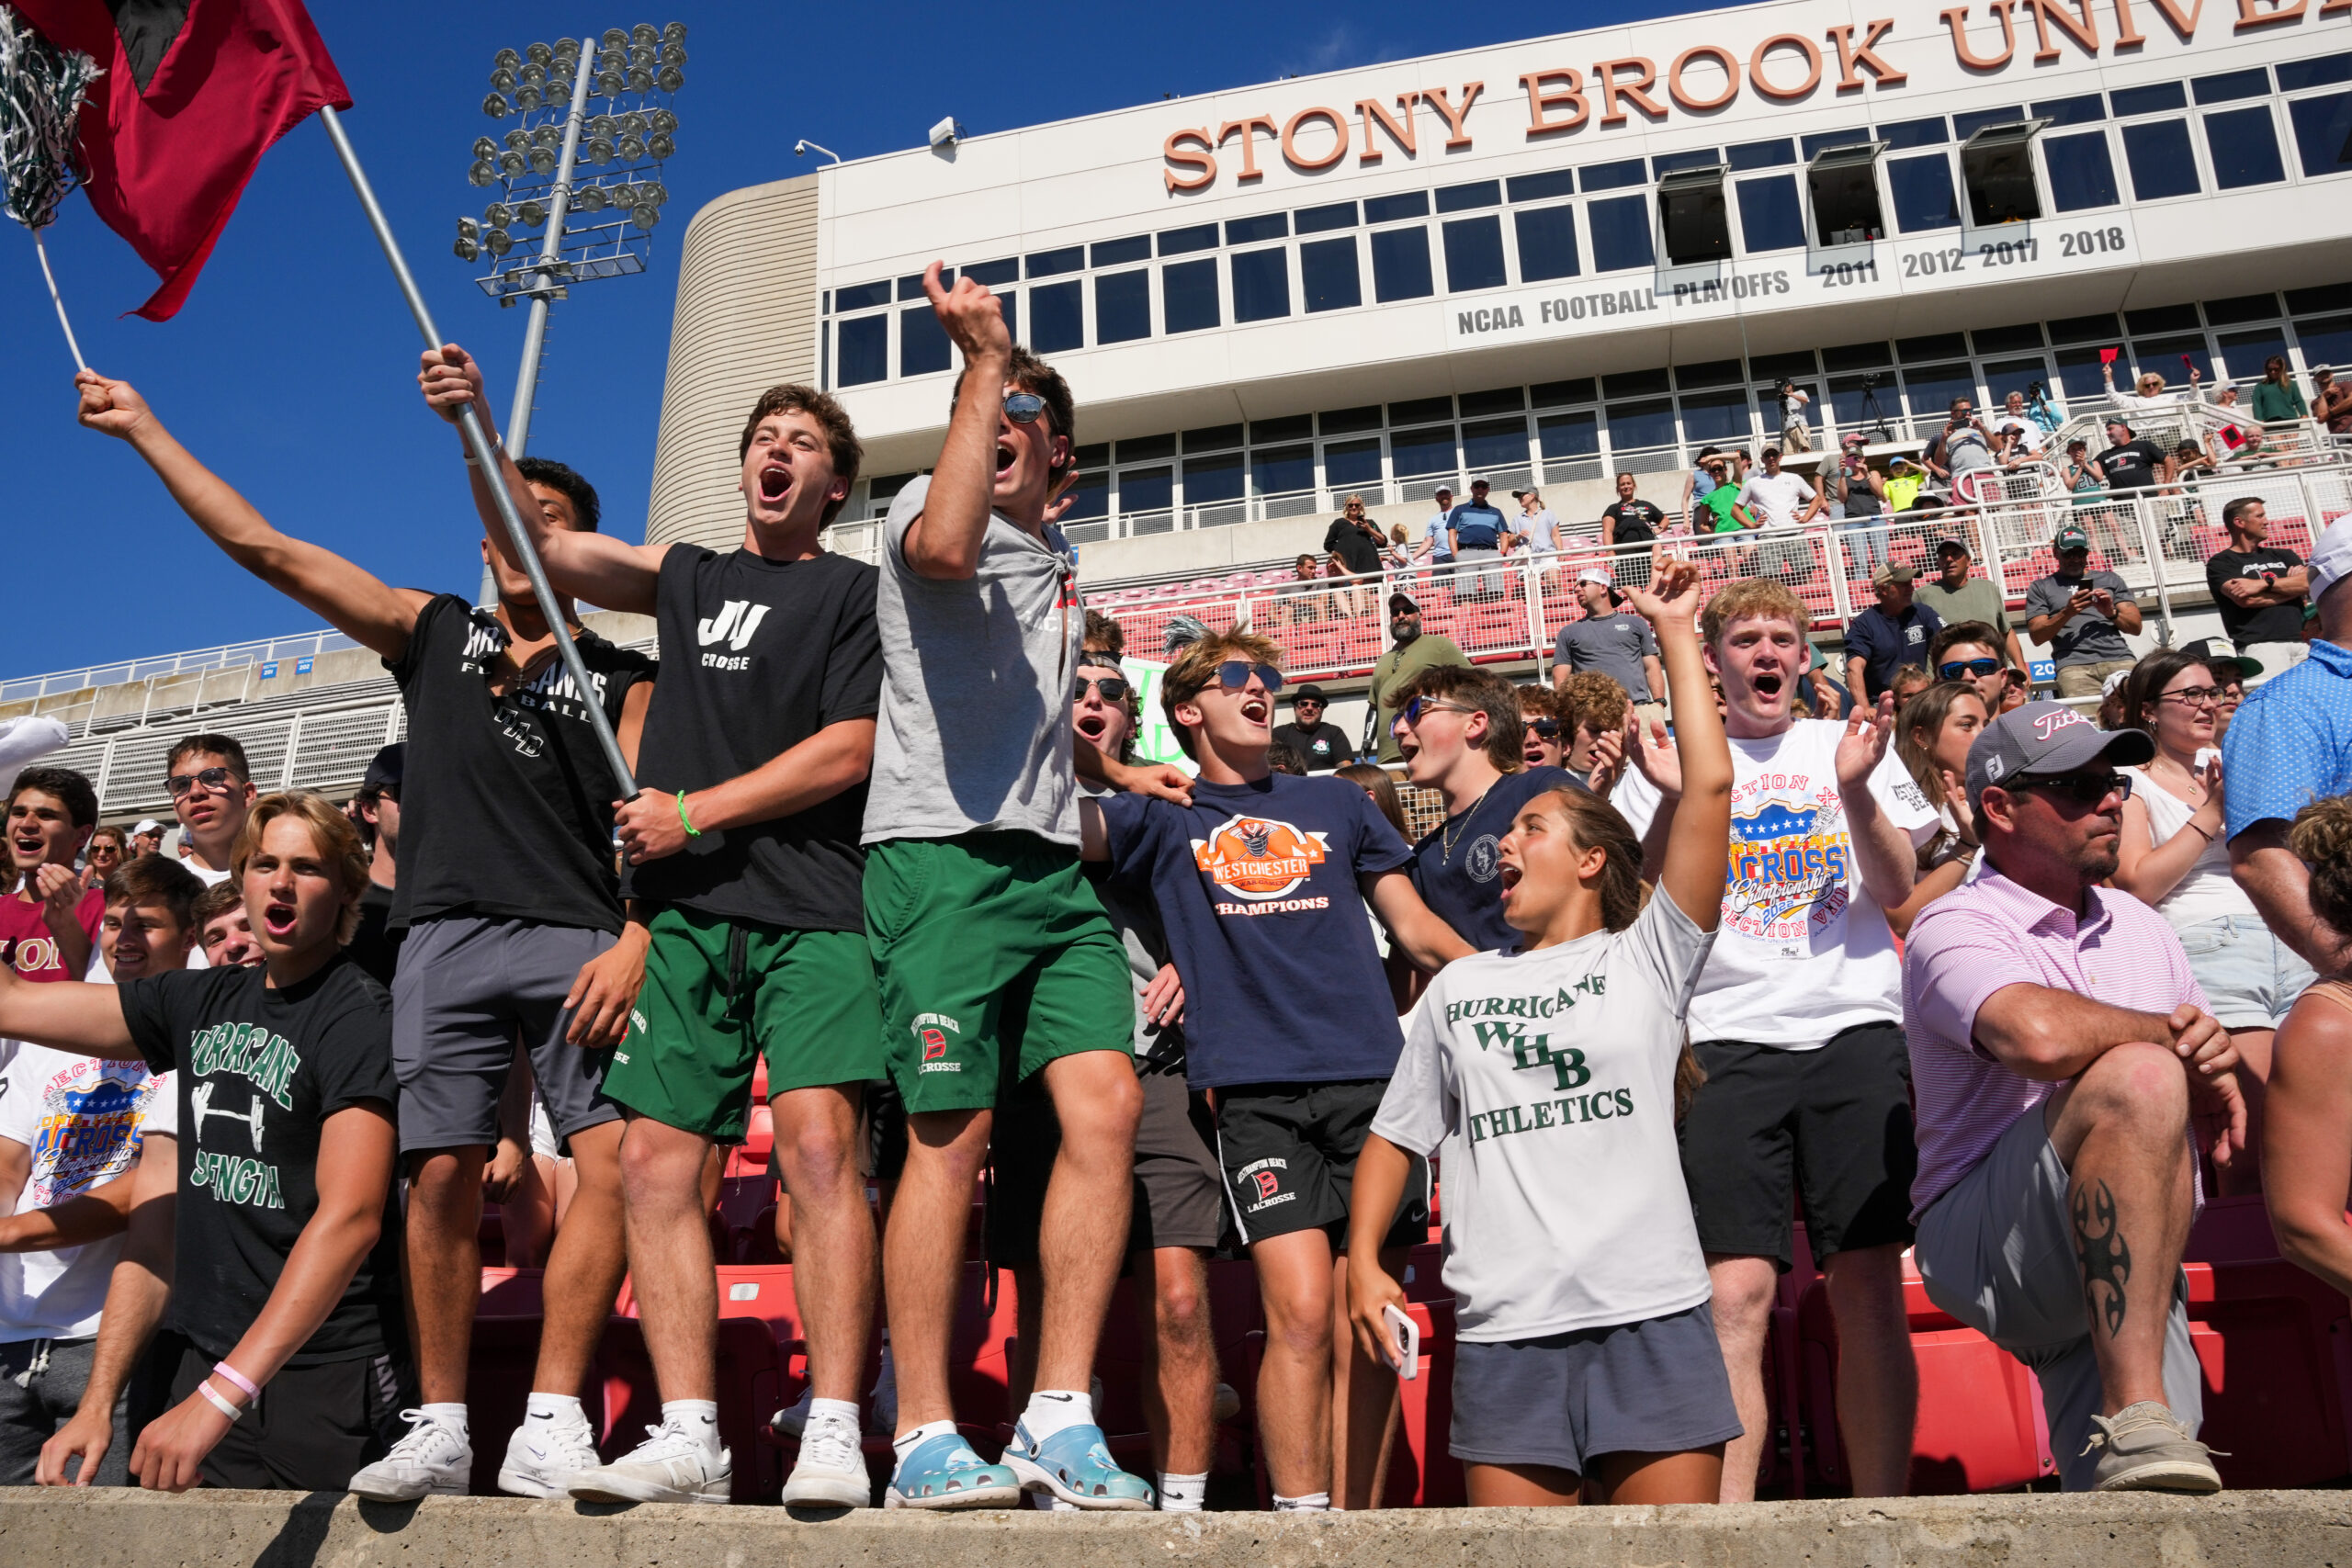 A large contingent of fans made the trip to Stony Brook University to cheer on the Westhampton Beach girls lacrosse team in the Long Island Championship. In the days before Title IX, girls team almost never had spectators for their games. RON ESPOSITO